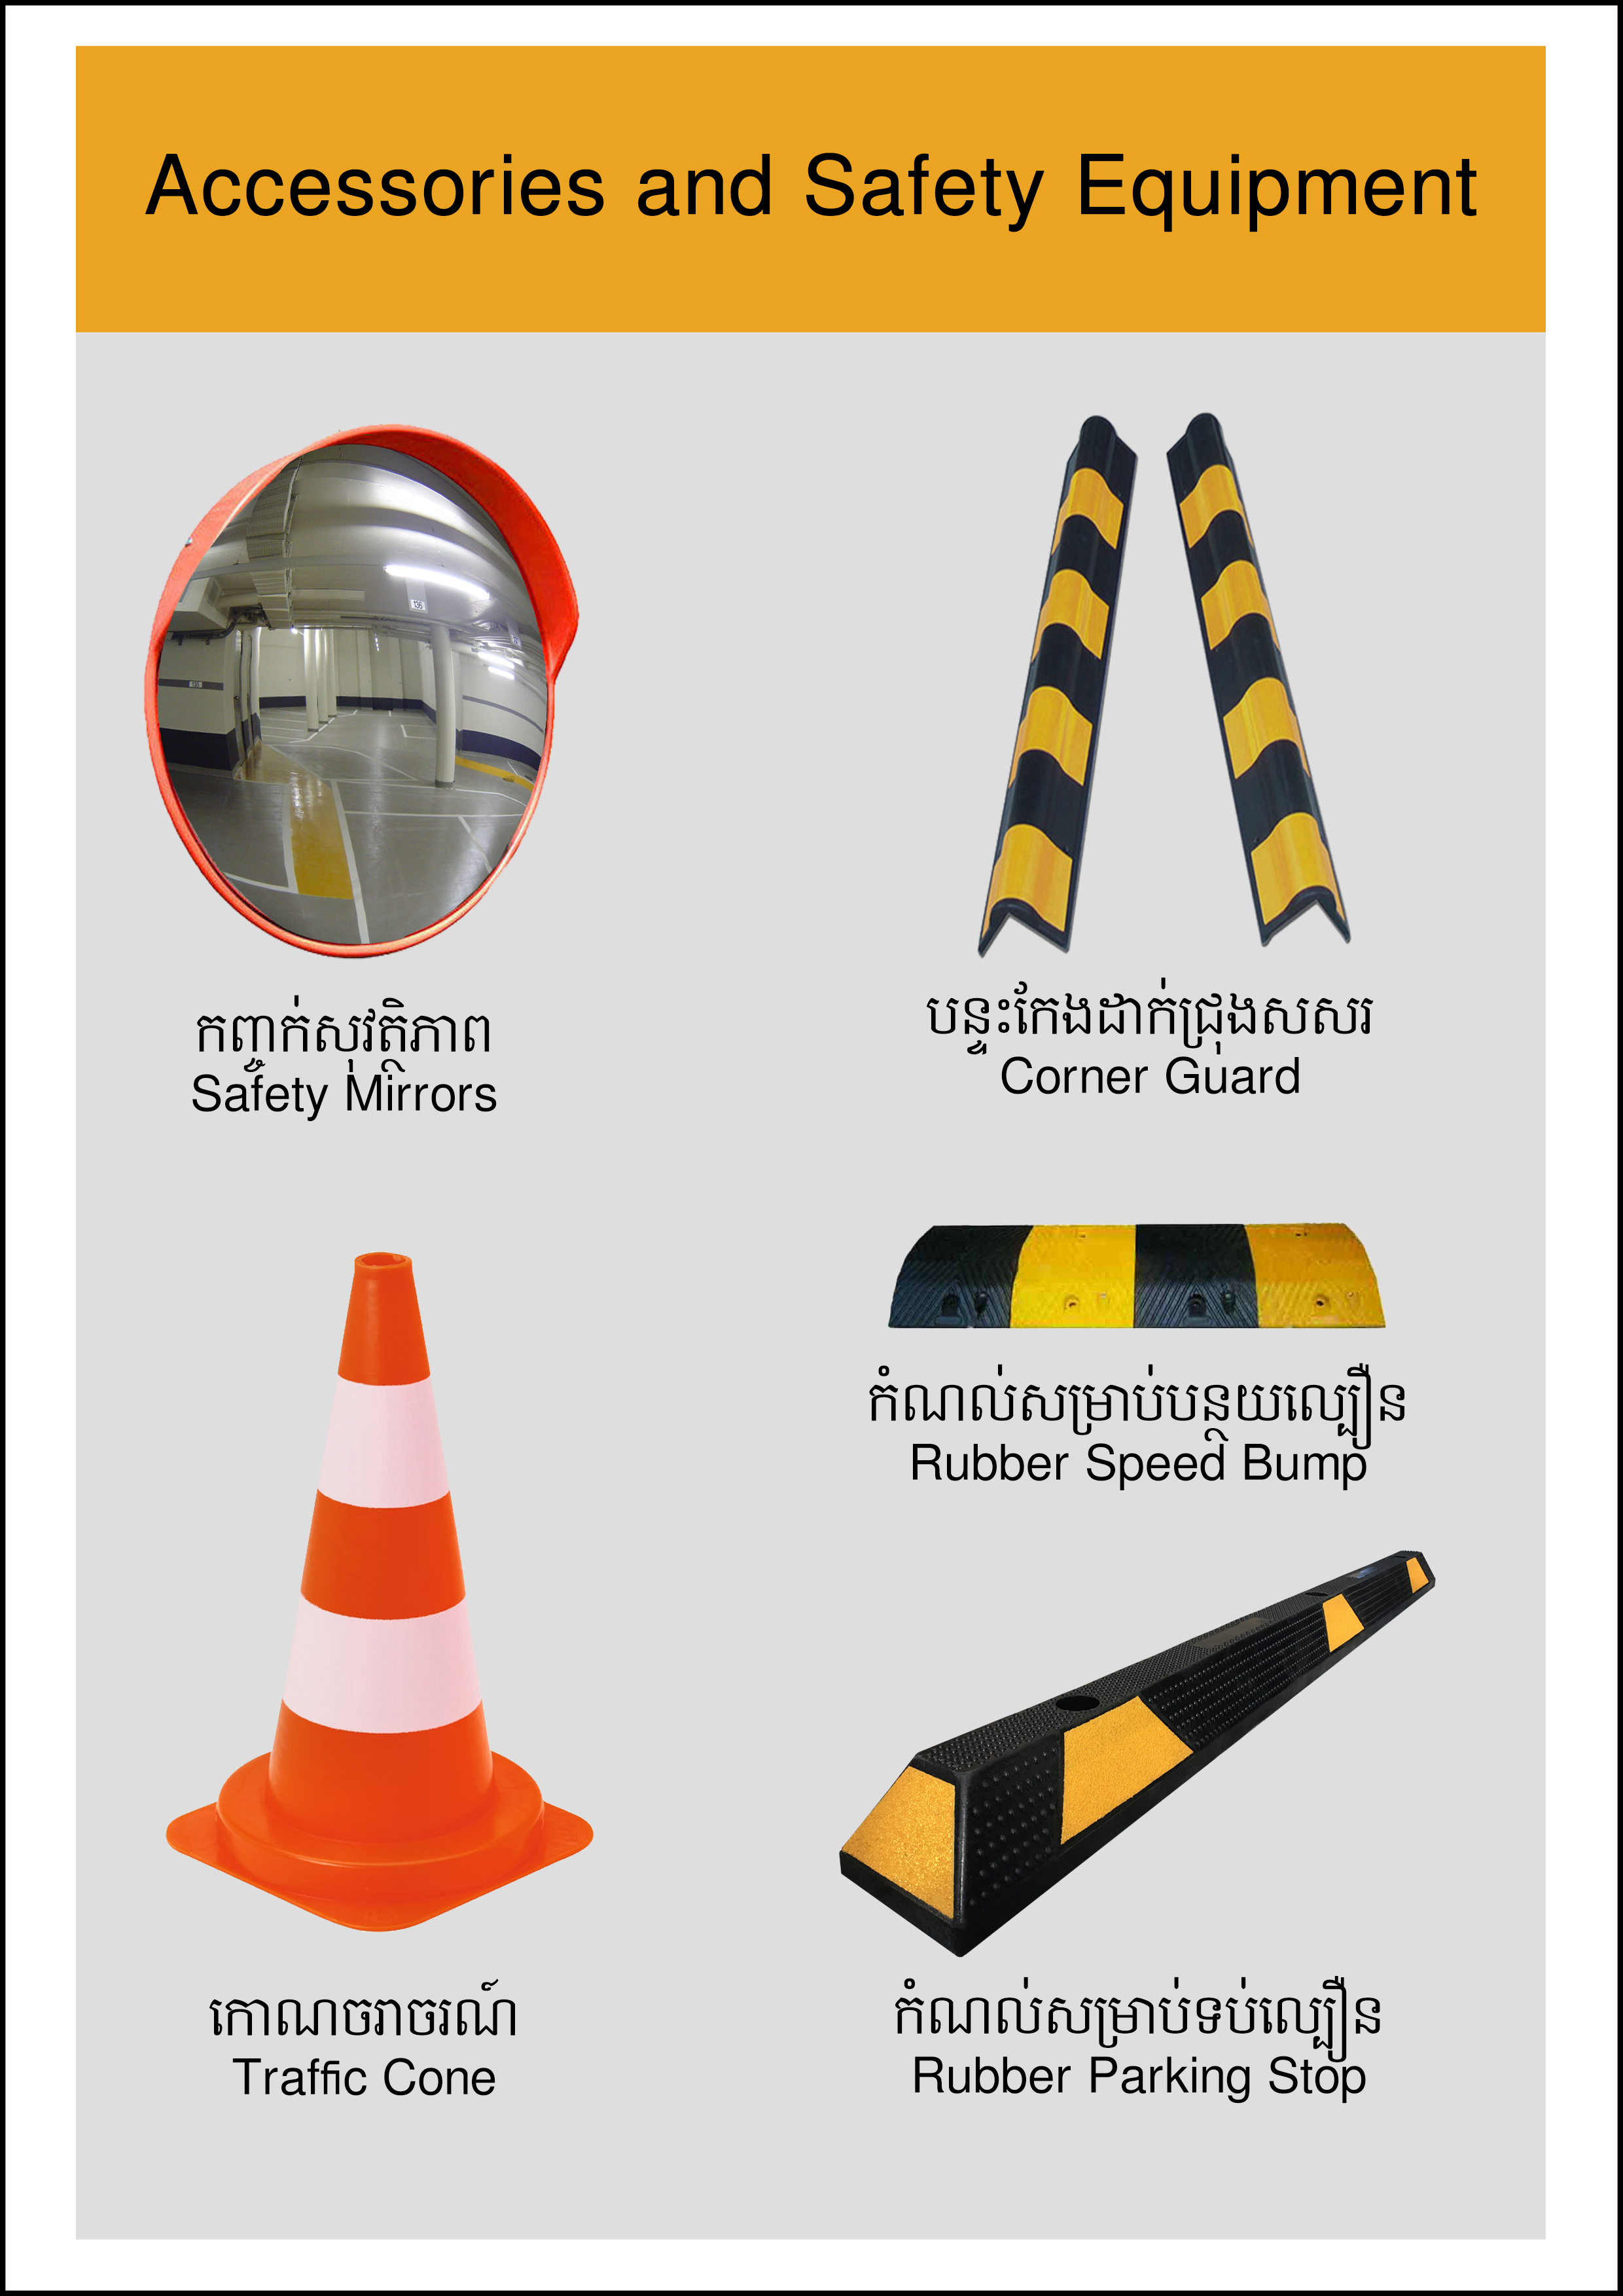 10.accessory and safety equipment